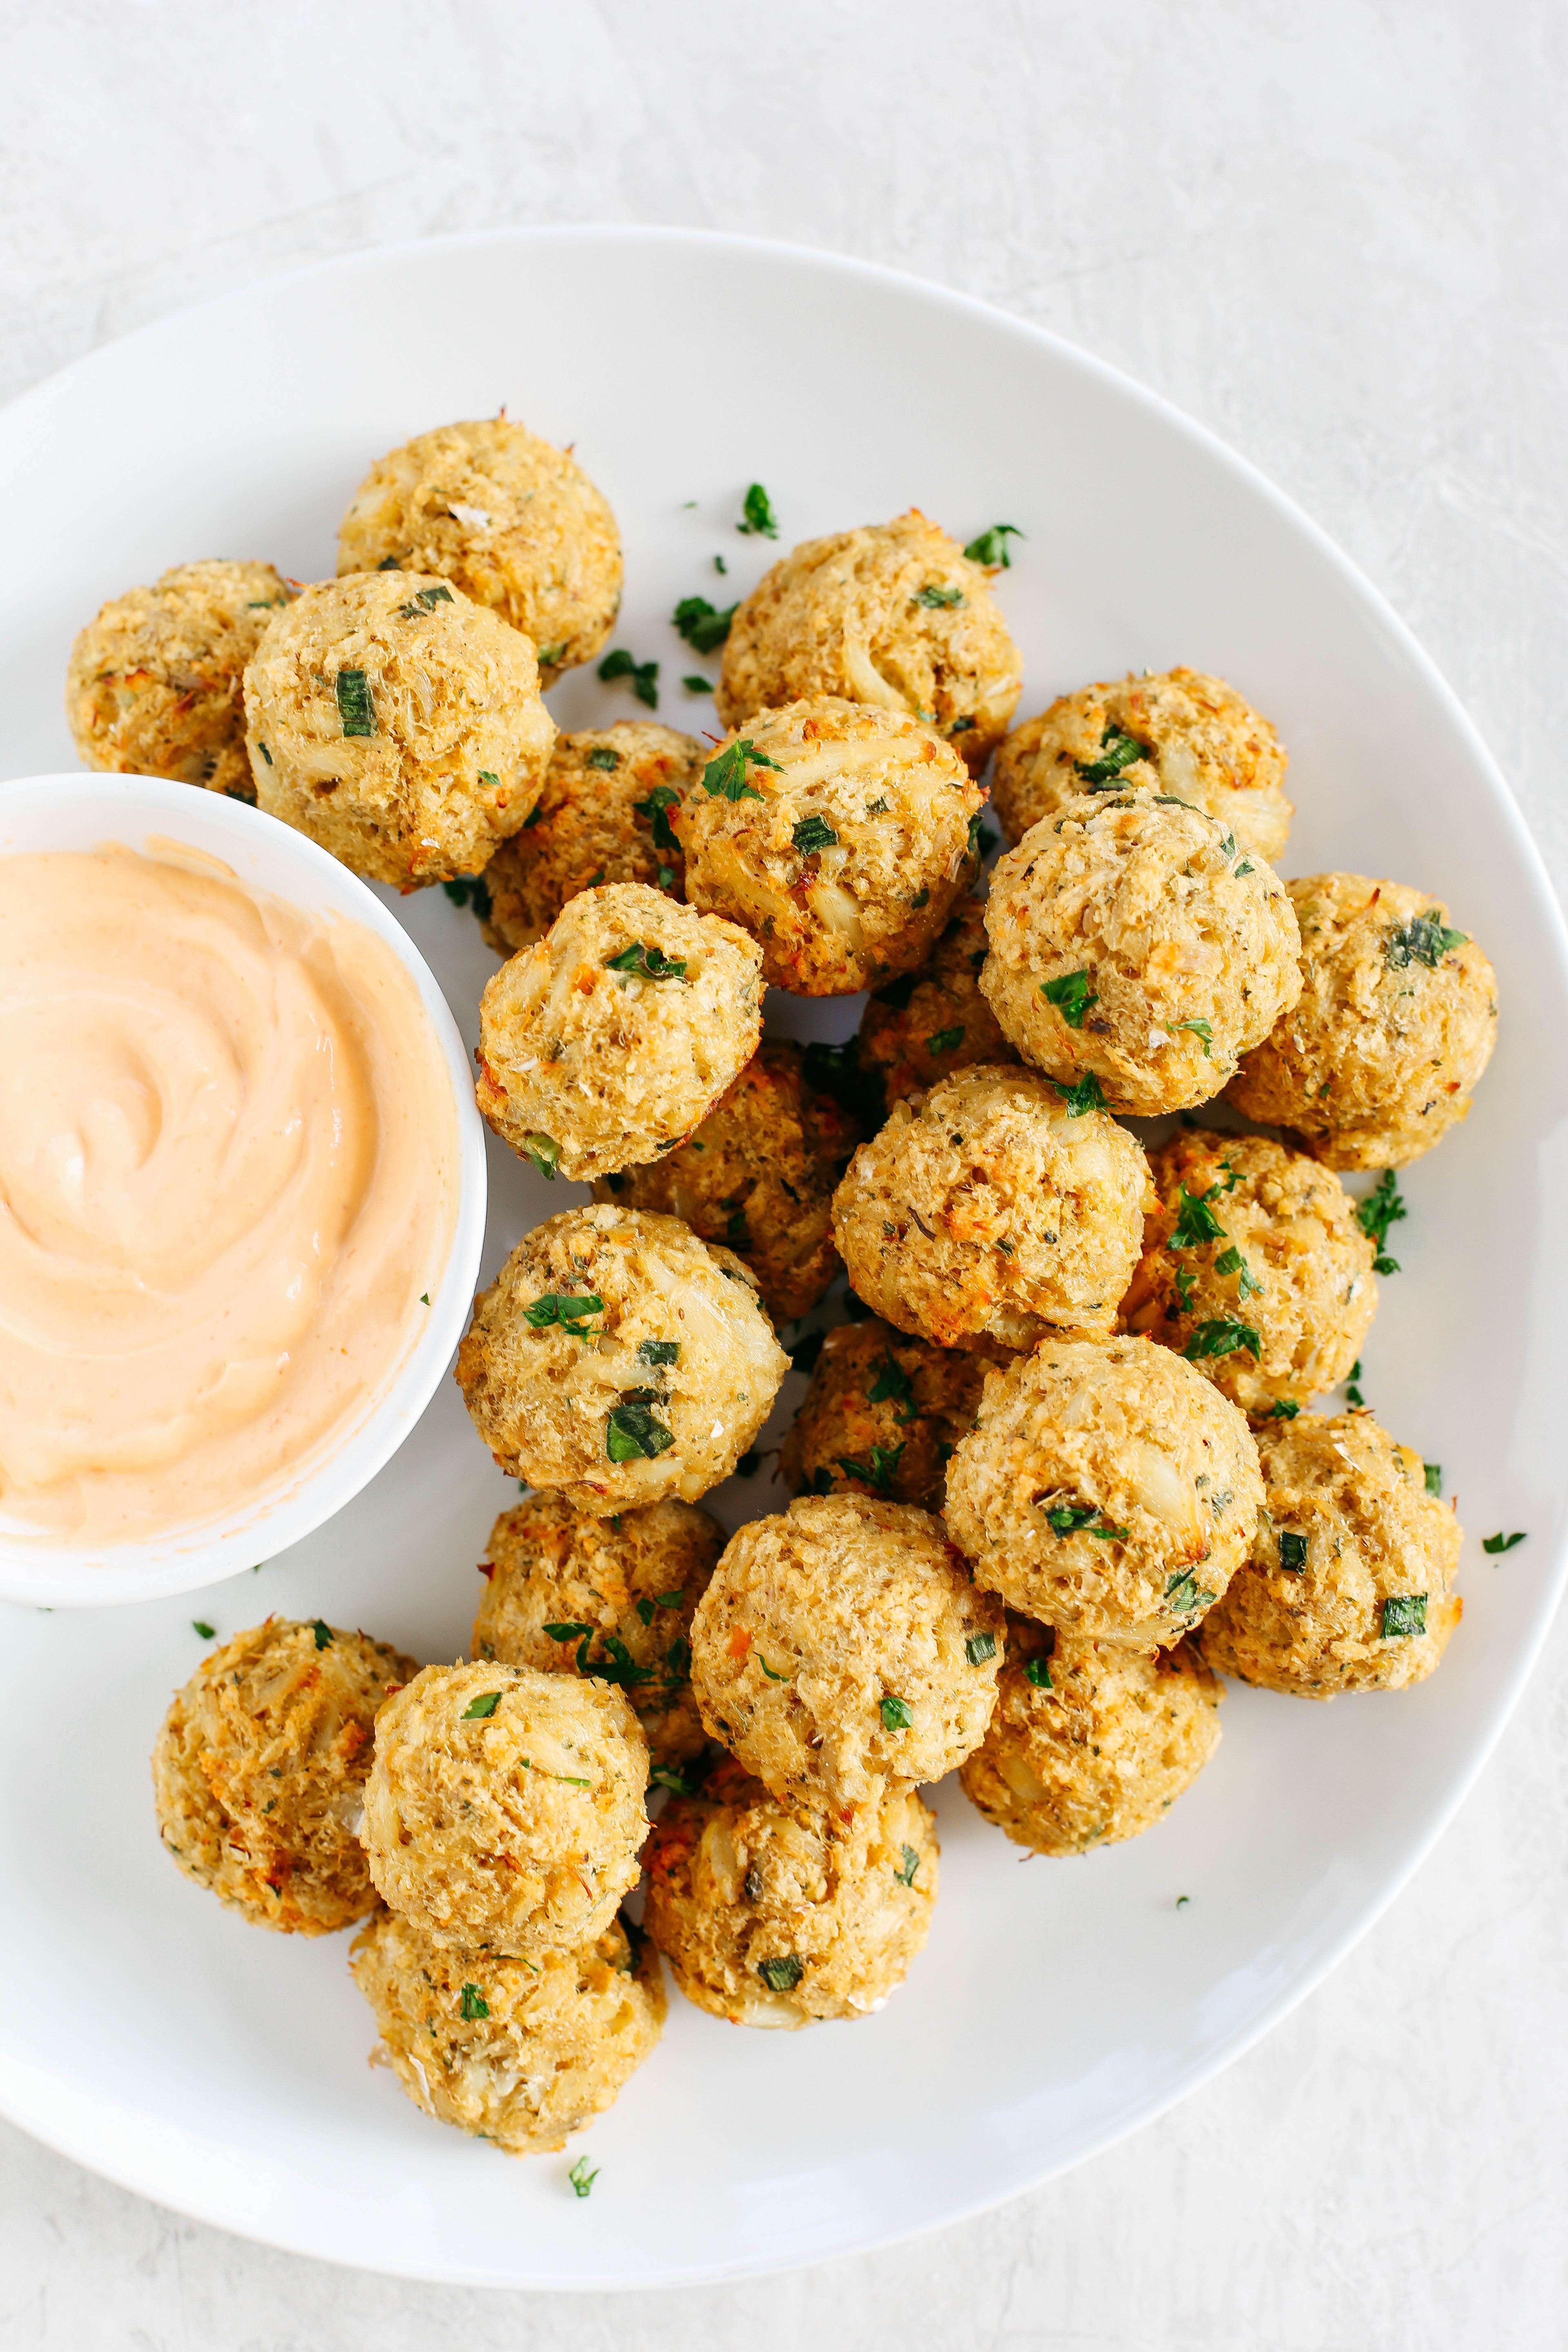 Baked Crab Cake Balls with Sriracha Dipping Sauce